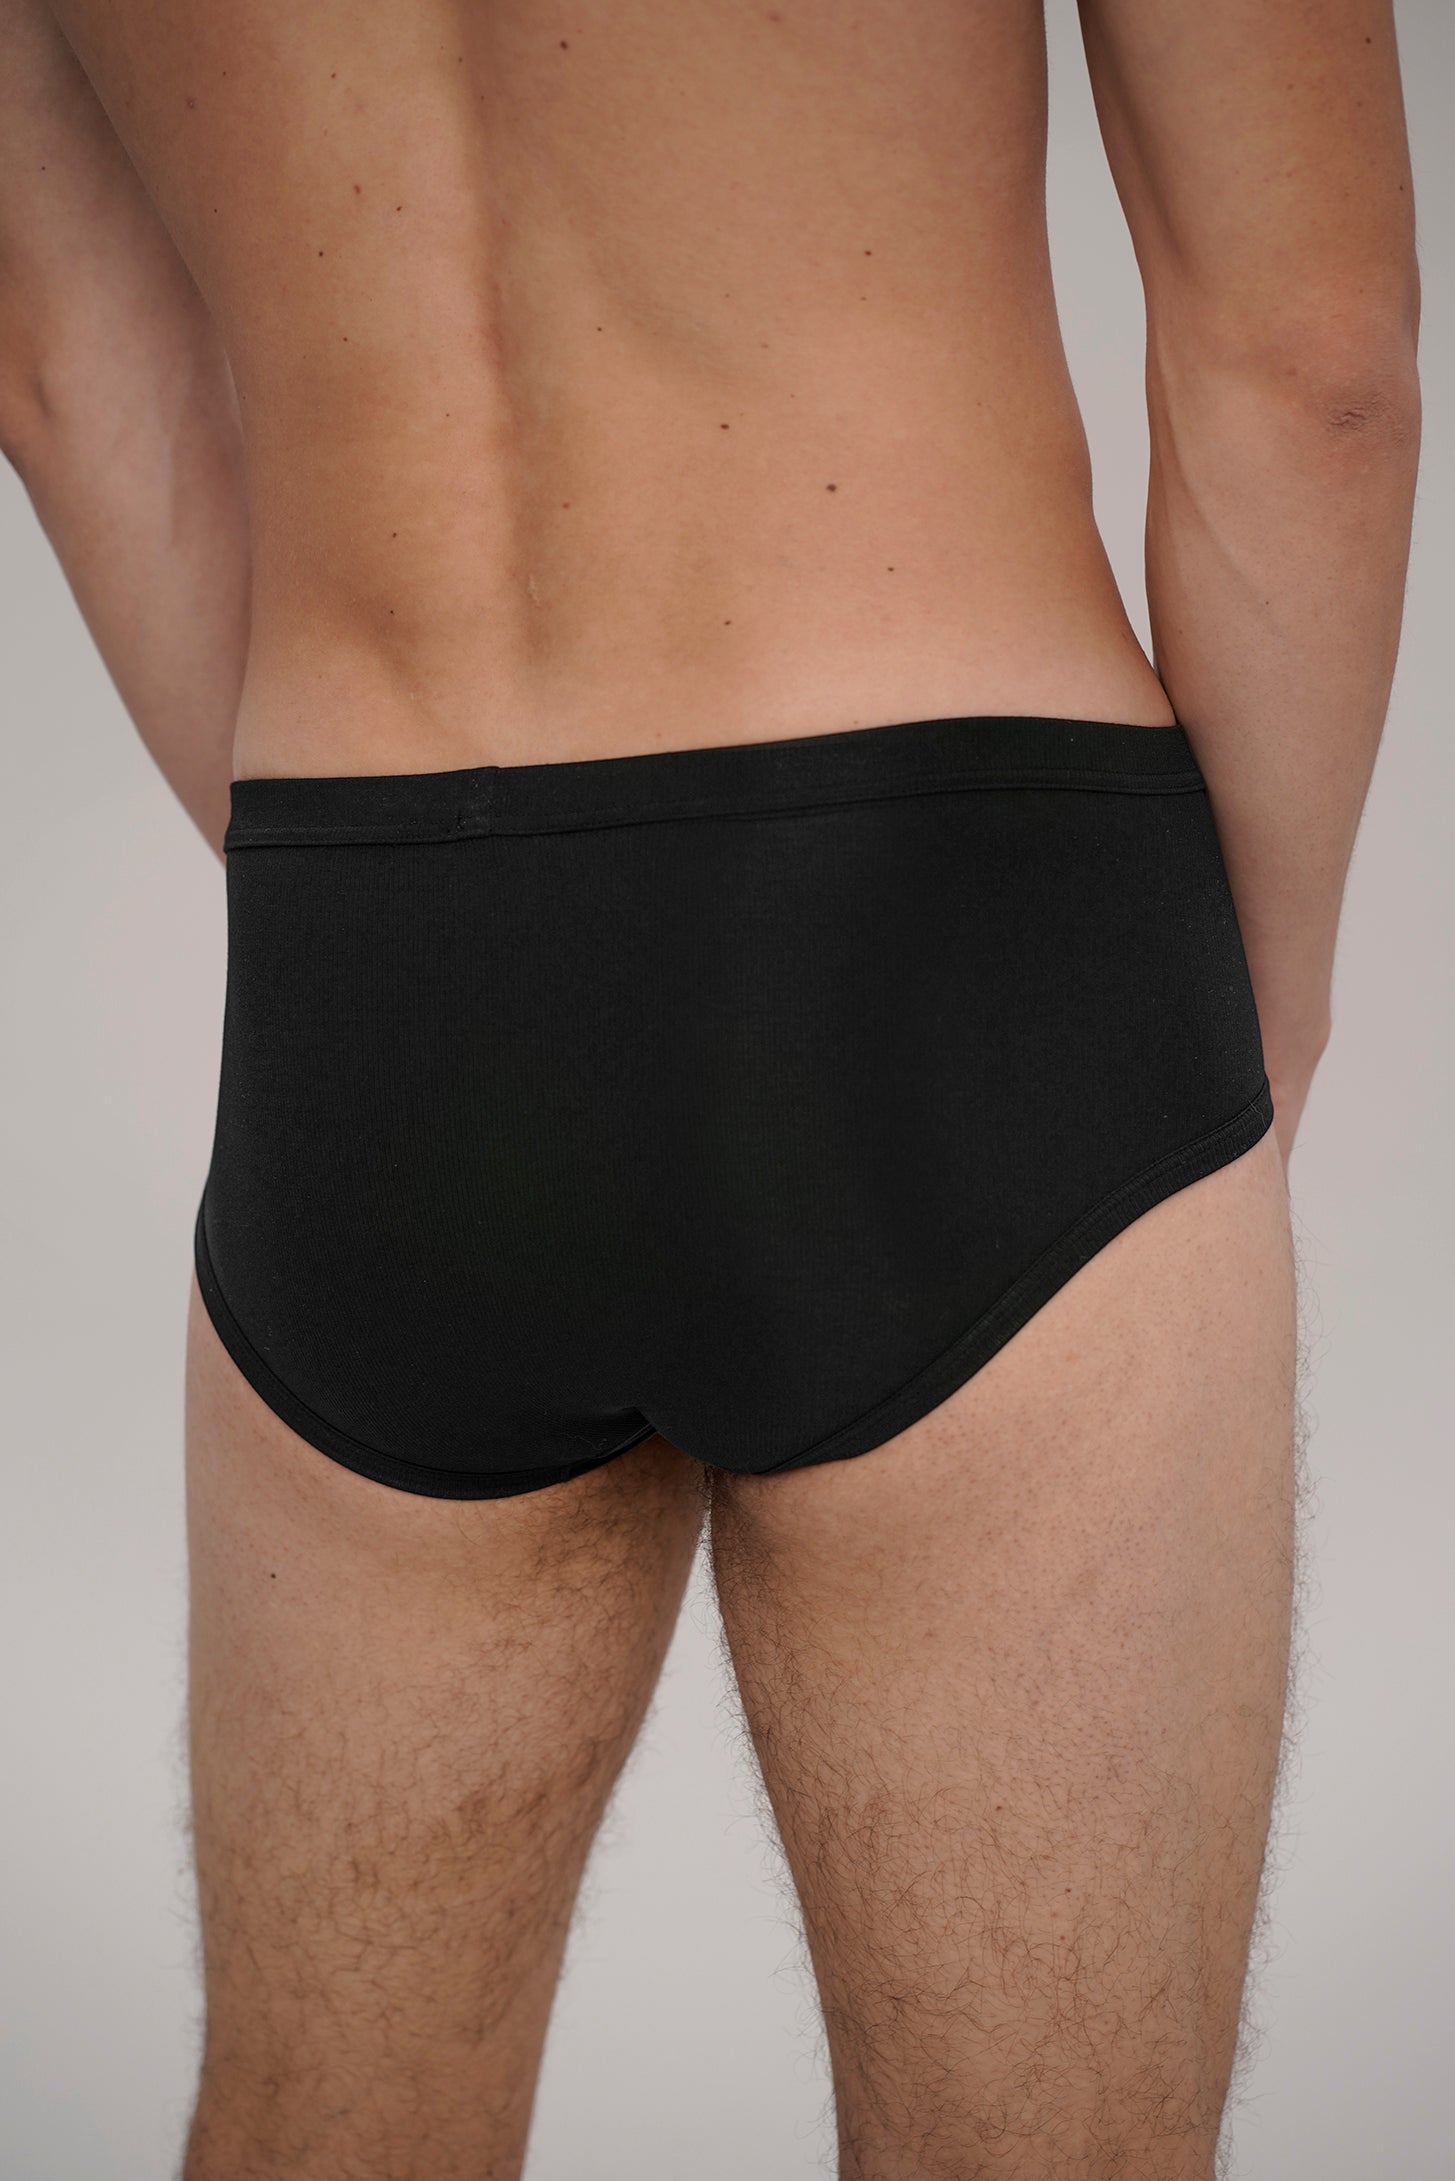 Briefs / underpants in black made from natural MicroModal from moi-basics